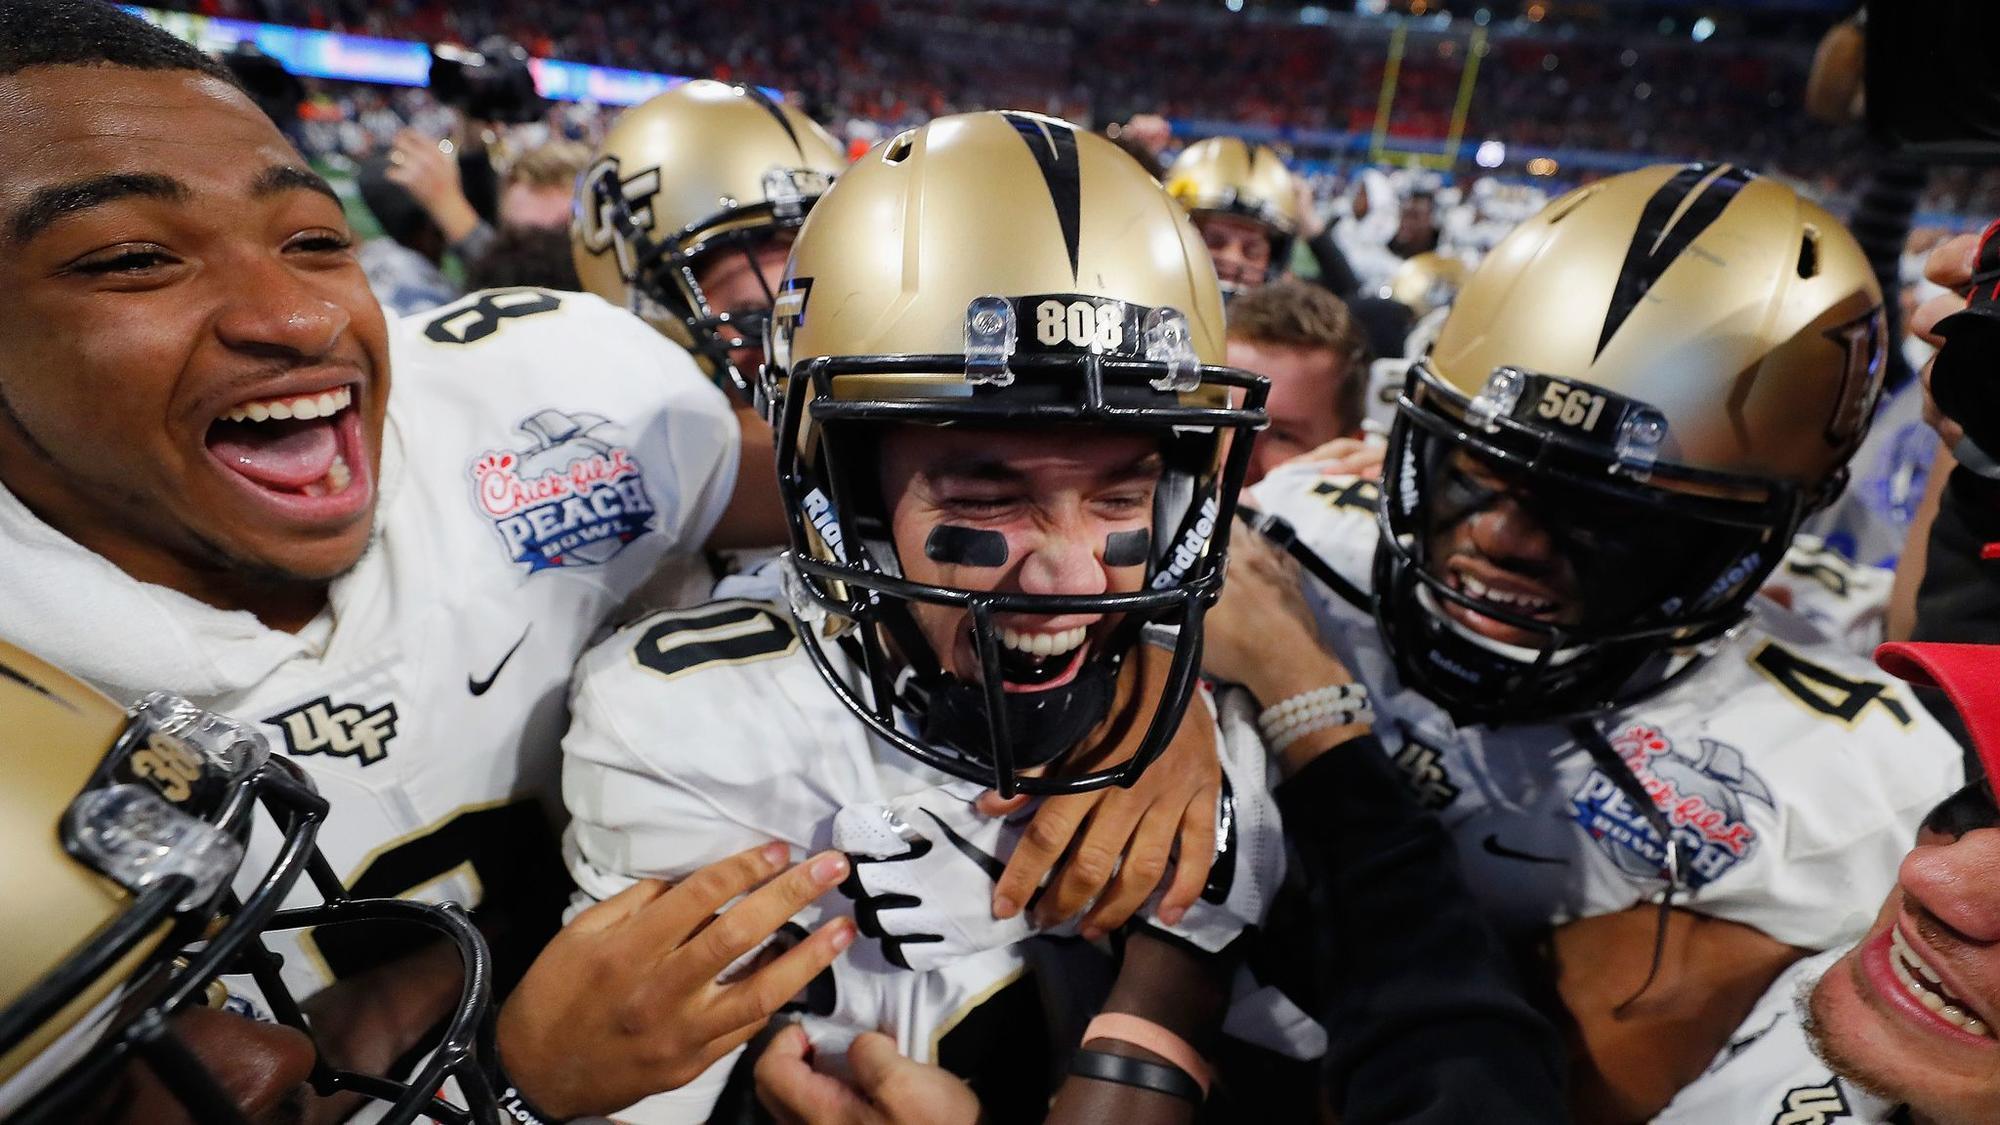 NFL to honor undefeated UCF football team during Pro Bowl - Orlando Sentinel2000 x 1125